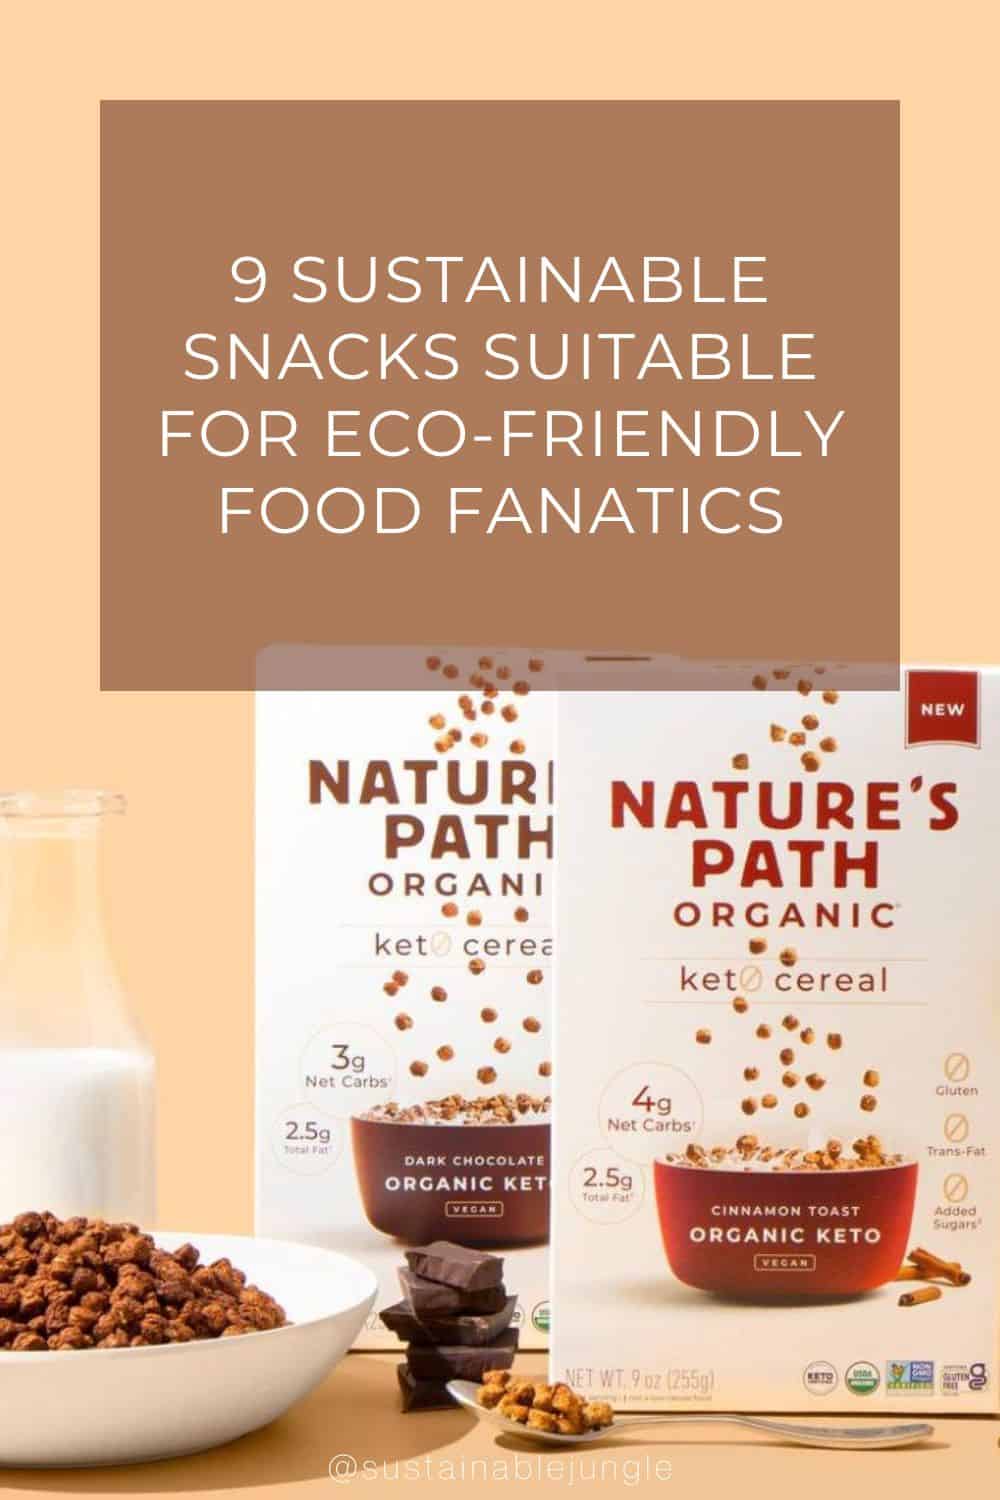 9 Sustainable Snacks Suitable For Eco-Friendly Food Fanatics Image by Nature’s Path Organic #sustainablesnacks #sustainablesnackbrands #snackswithsustainablepackaging #ecofriendlysnacks #ecofriendlypackagedsnacks #sustainablejungle